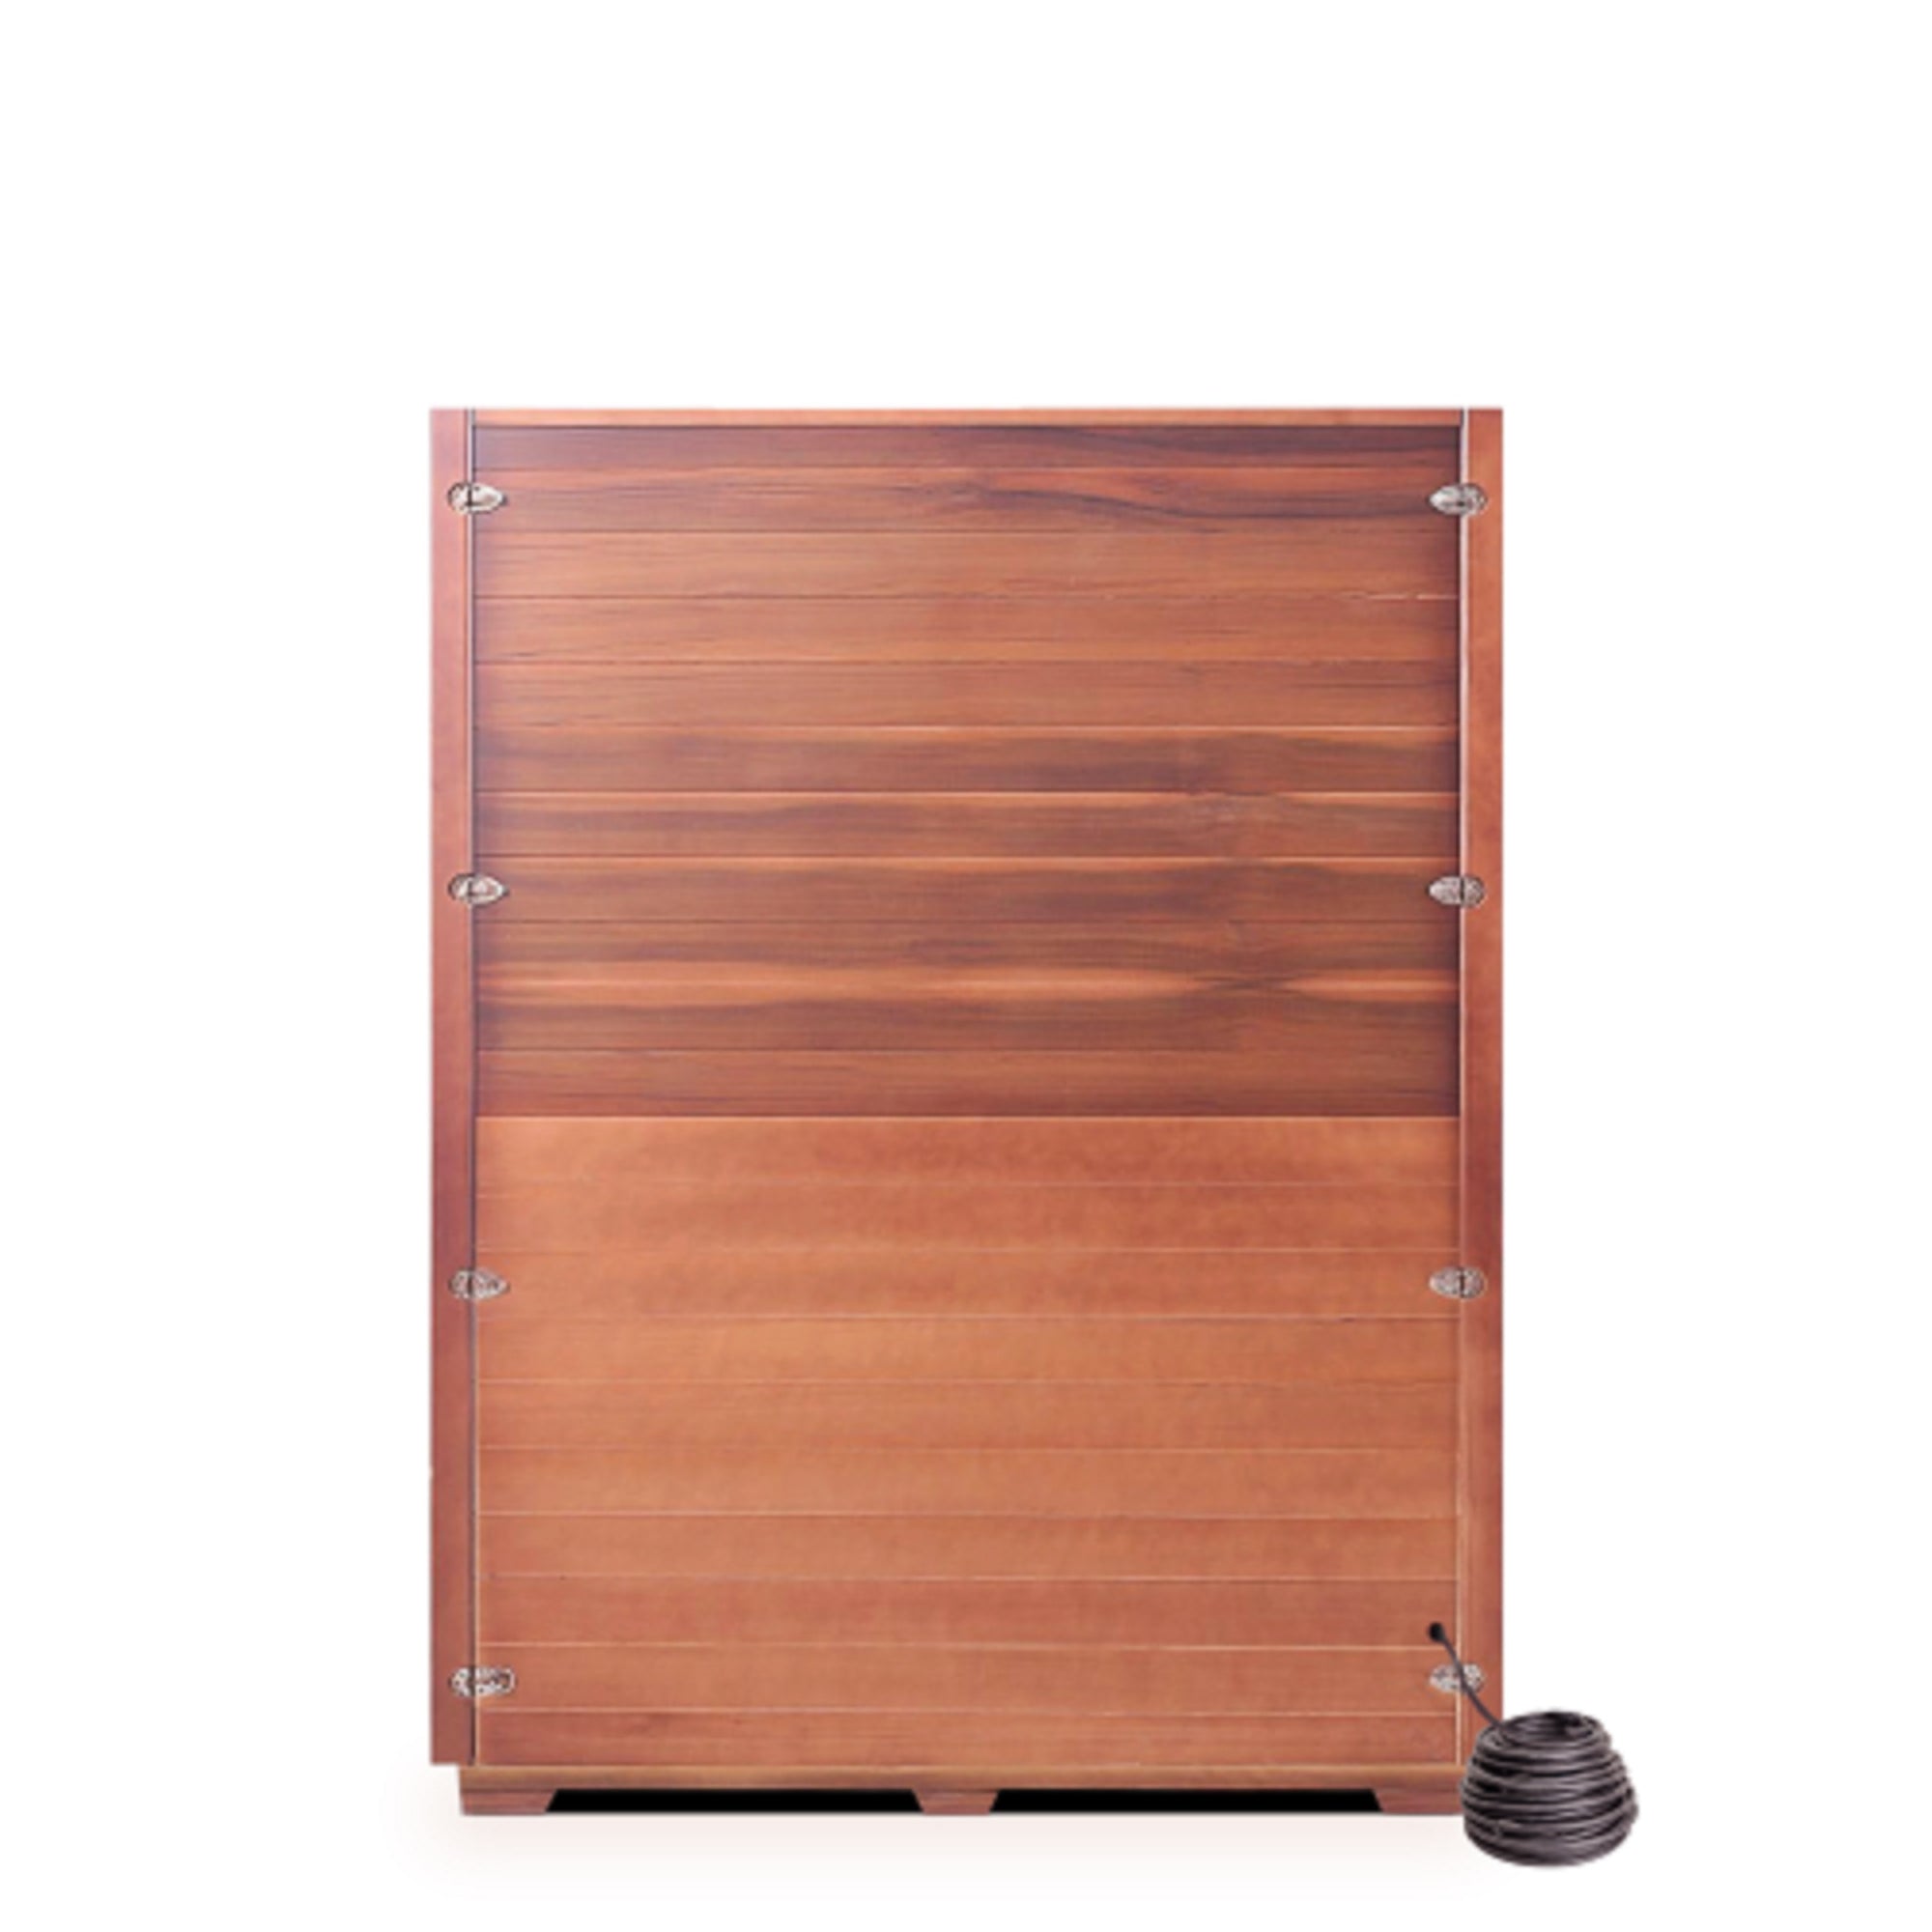 Enlighten sauna SaunaTerra Dry Traditional SunRise 4 Person Corner Indoor Canadian Red Cedar Wood Outside And Inside with glass door front view